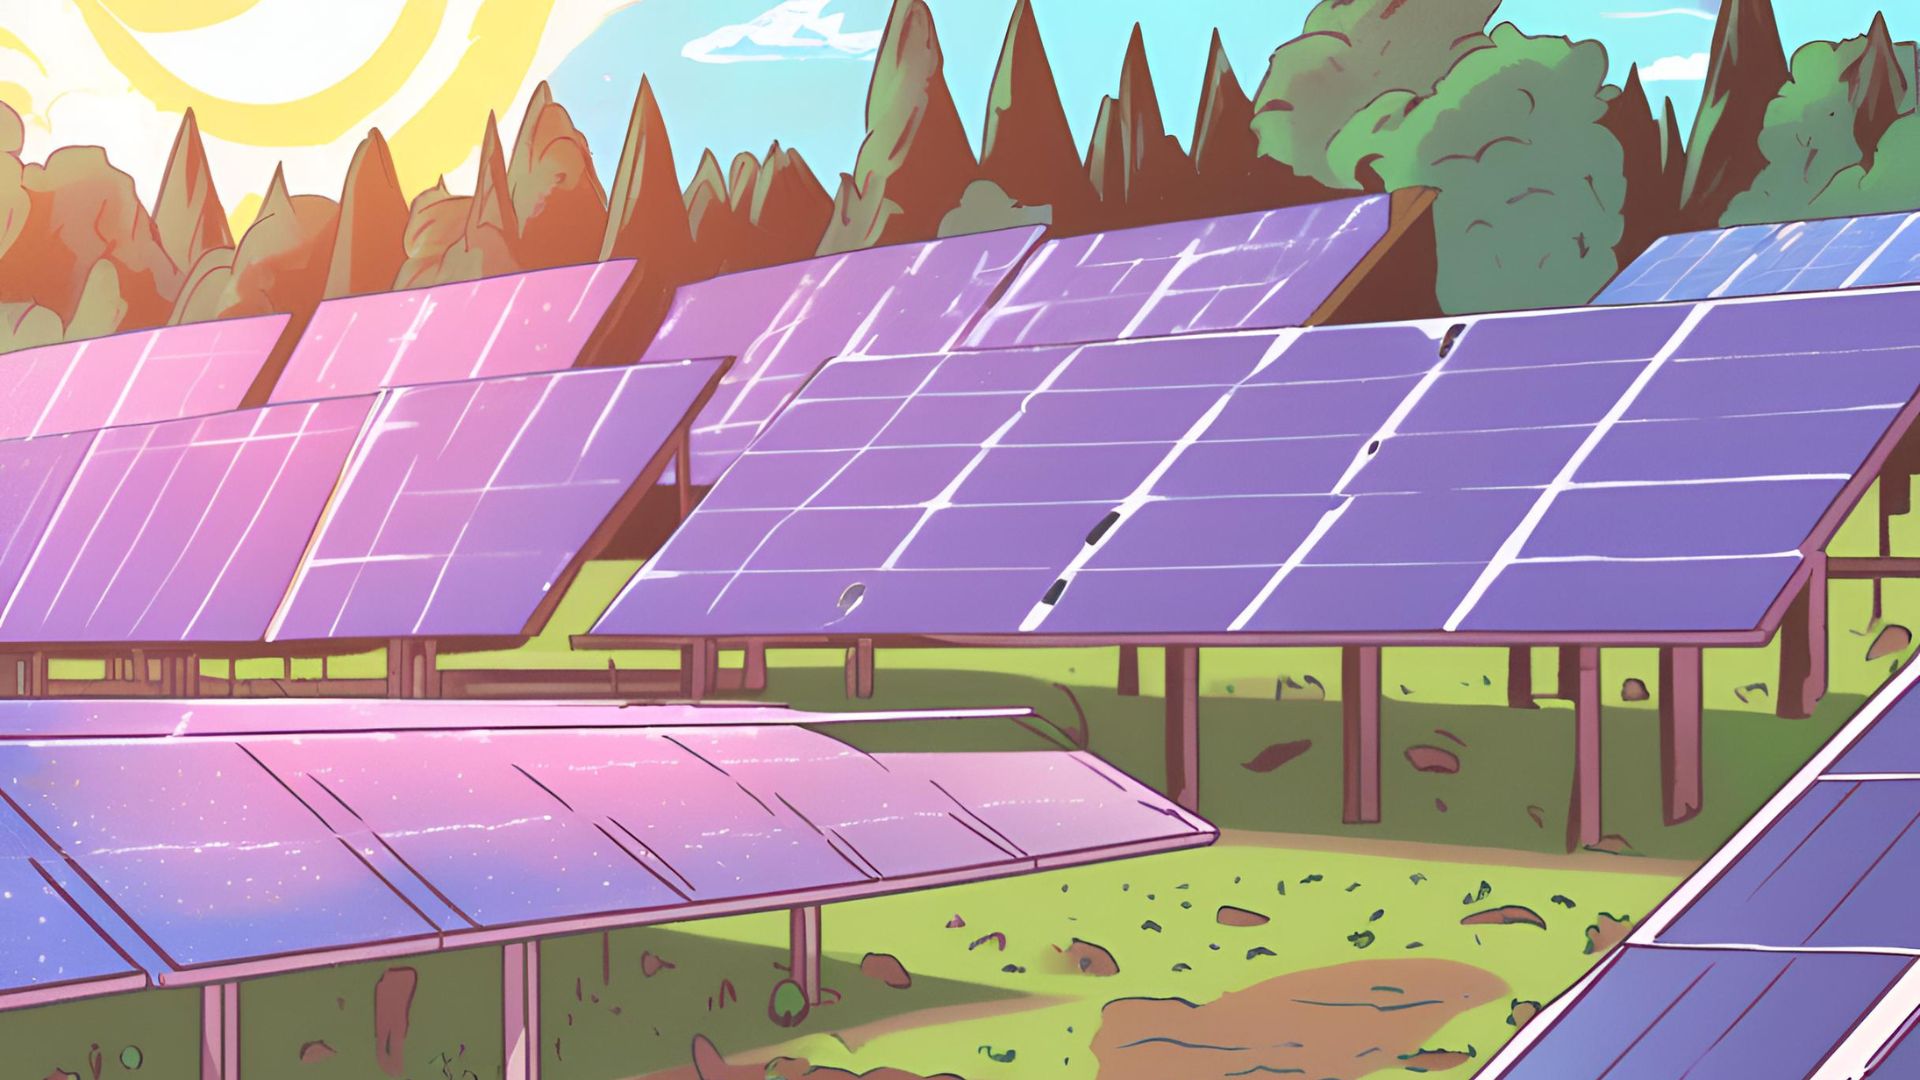 AI generated image of solar panels in a community solar display in a park with trees in the background and the sun shining. Graphic is in purple and green tones.